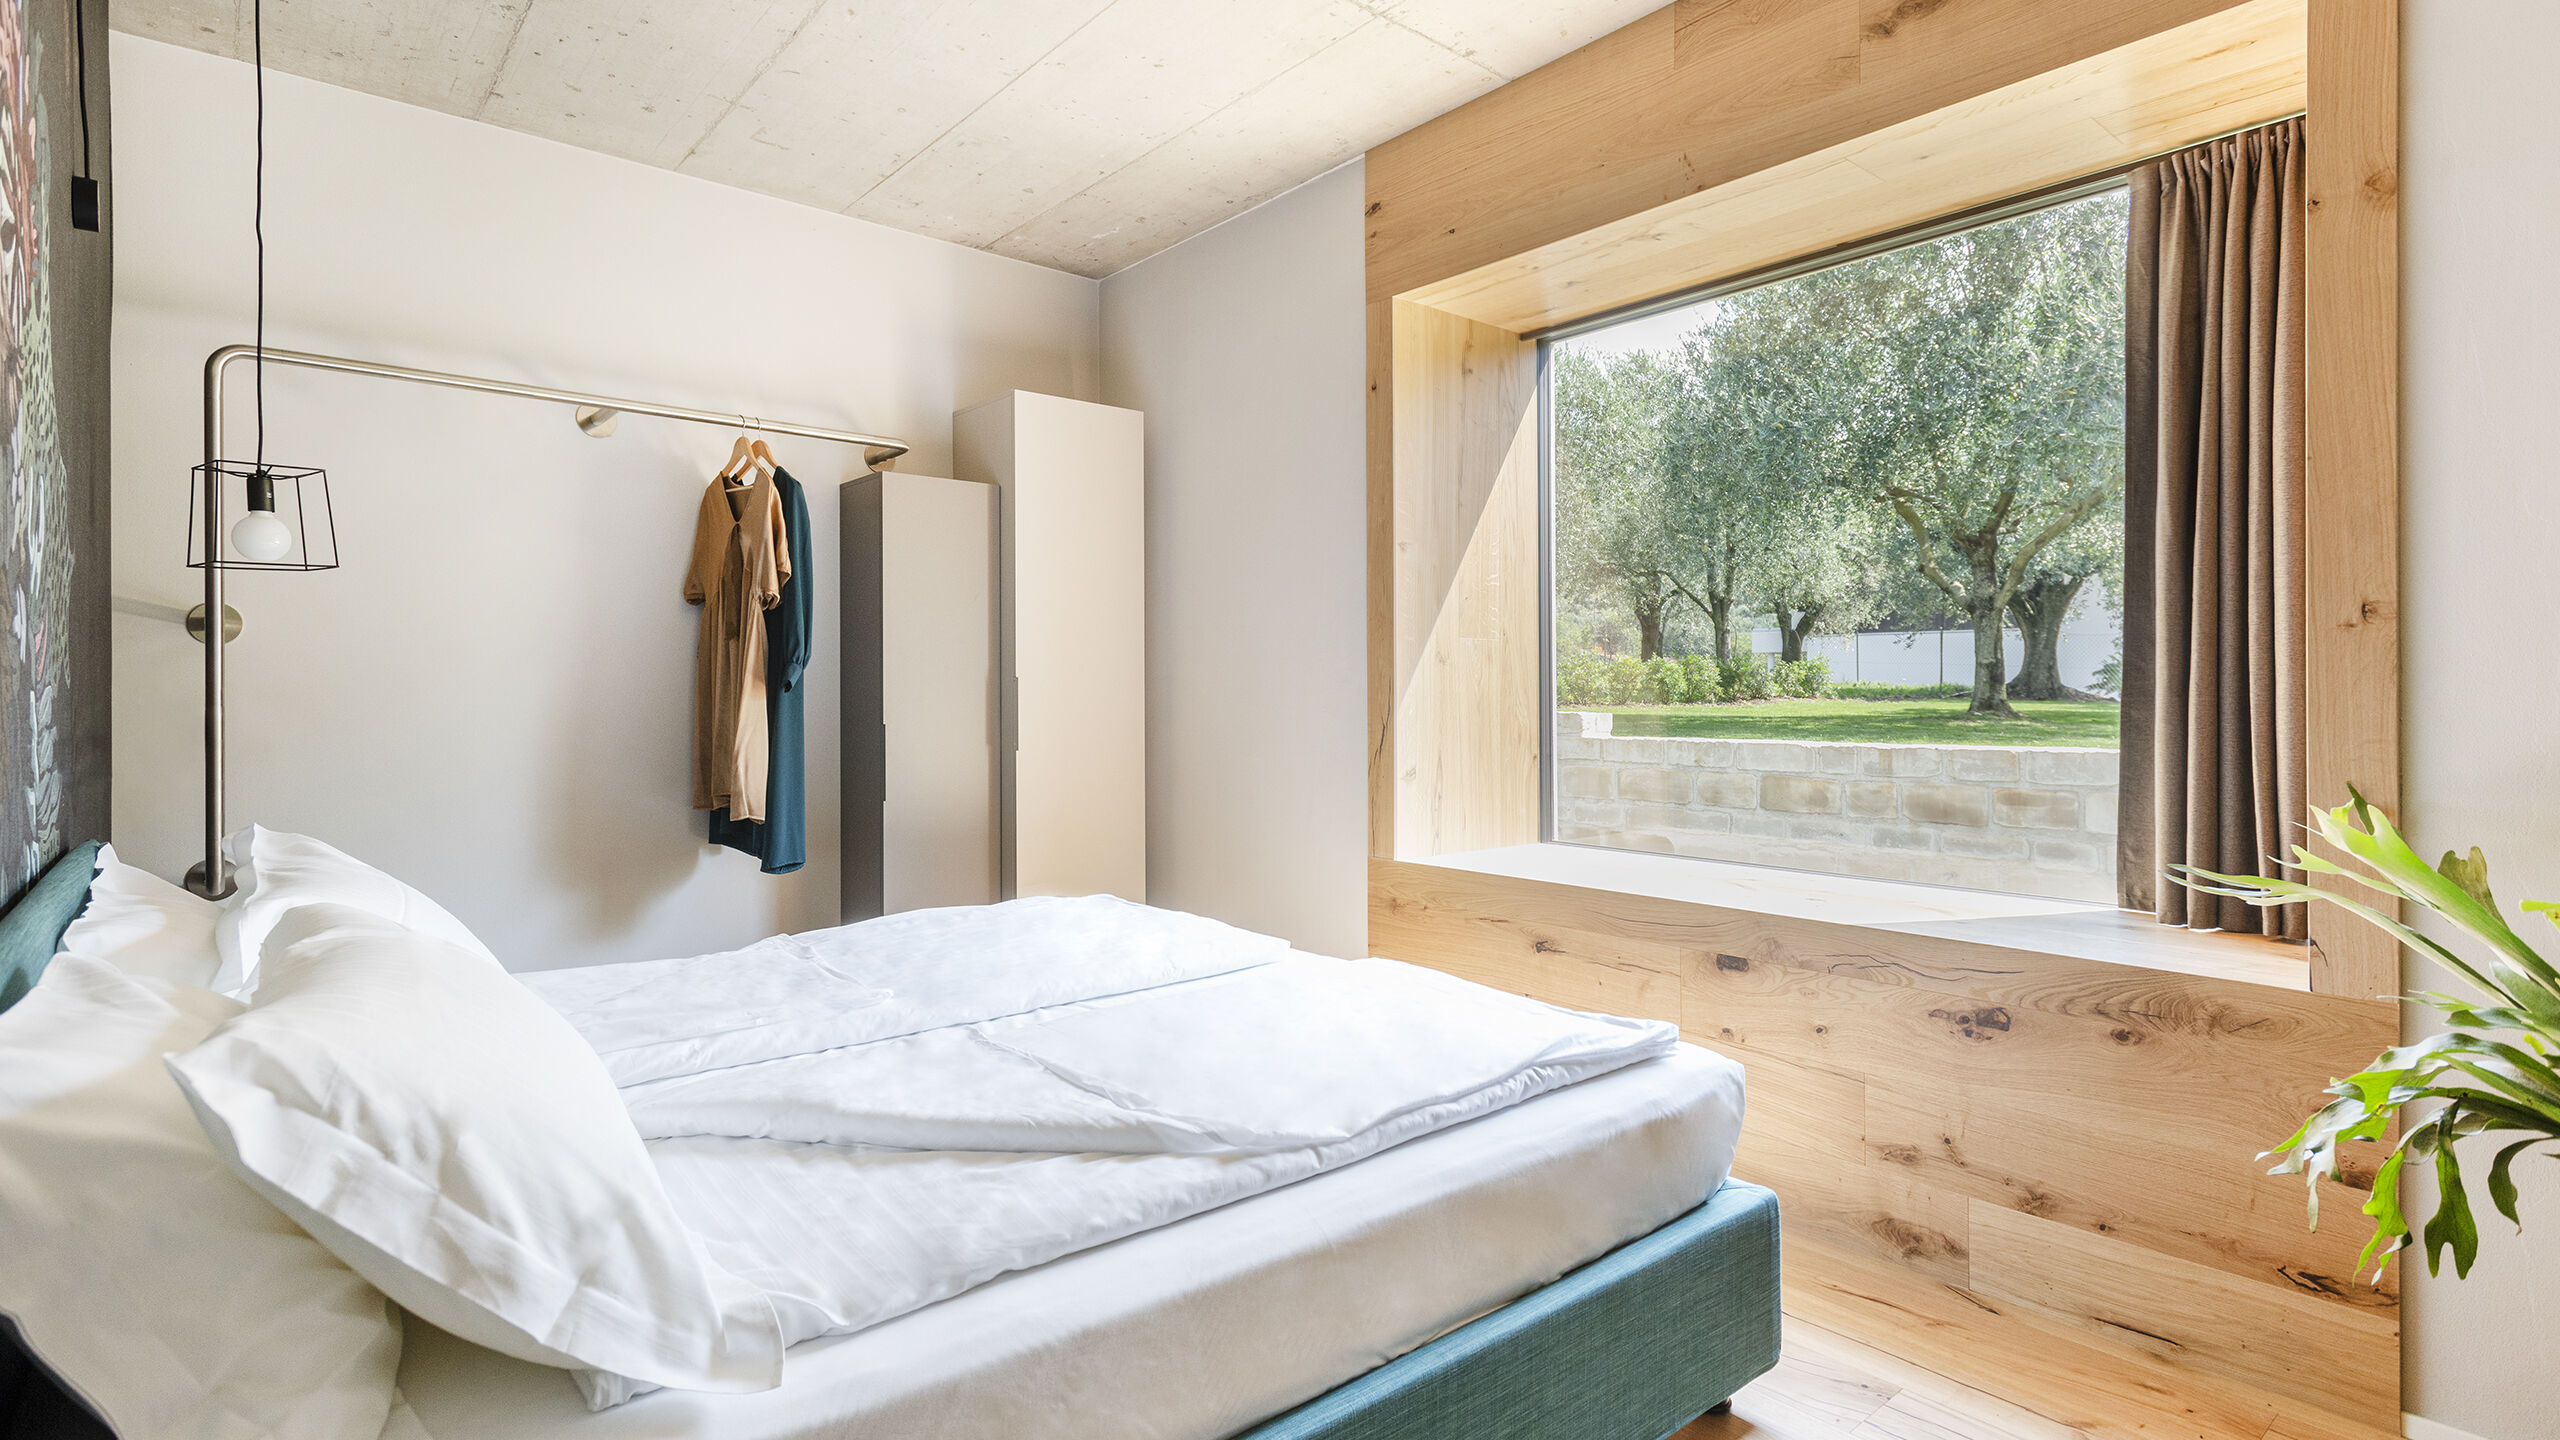 Oleeva Garda Living Suites, rooms and apartments just a few minutes from the lake and Riva del Garda in Trentino Oleeva Garda Living | Rooms and Suite